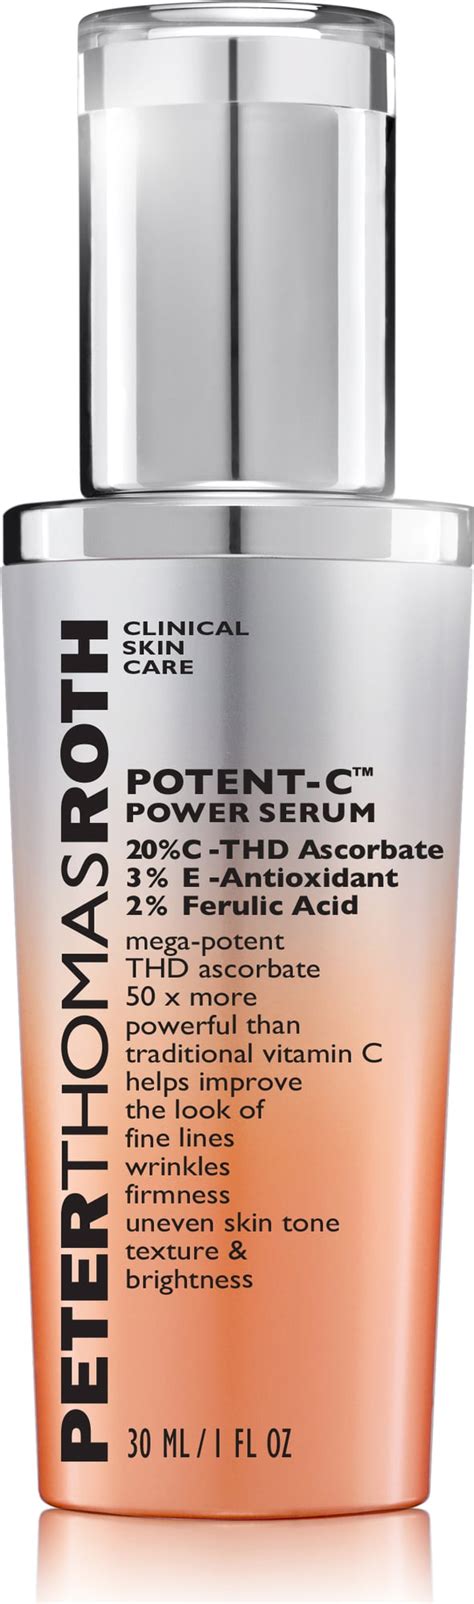 See what's new from peter thomas roth at anthropologie and discover even more brands and designers you'll adore. Peter Thomas Roth Potent-C Power Serum, 30 ml - Cosmeterie Online Shop